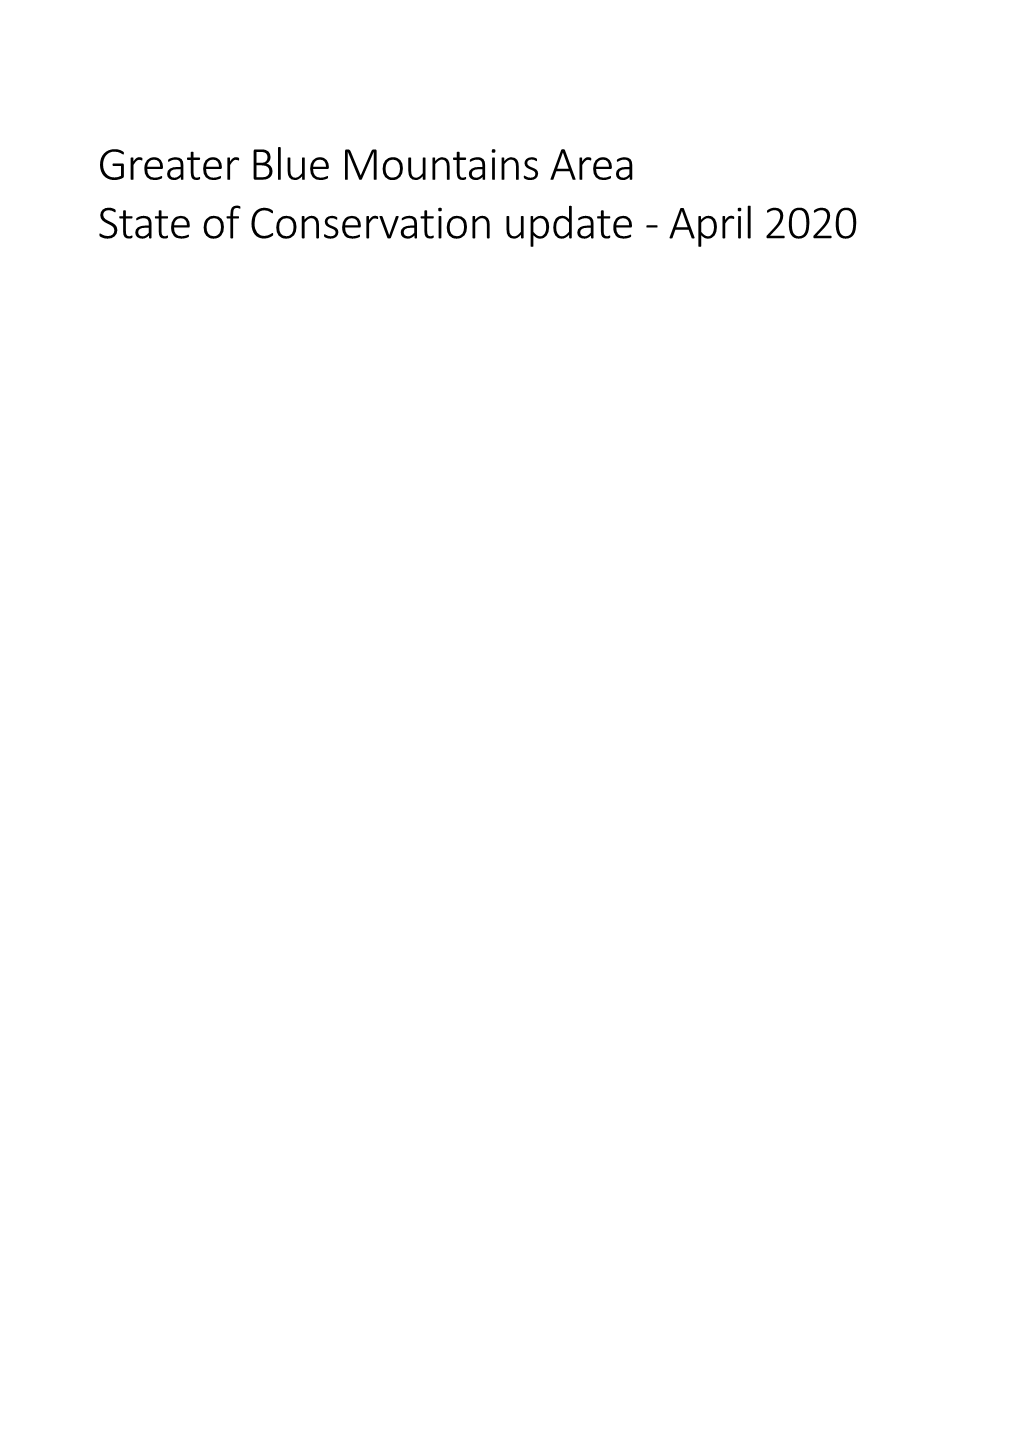 Greater Blue Mountains Area State of Conservation Update - April 2020 © Commonwealth of Australia 2020